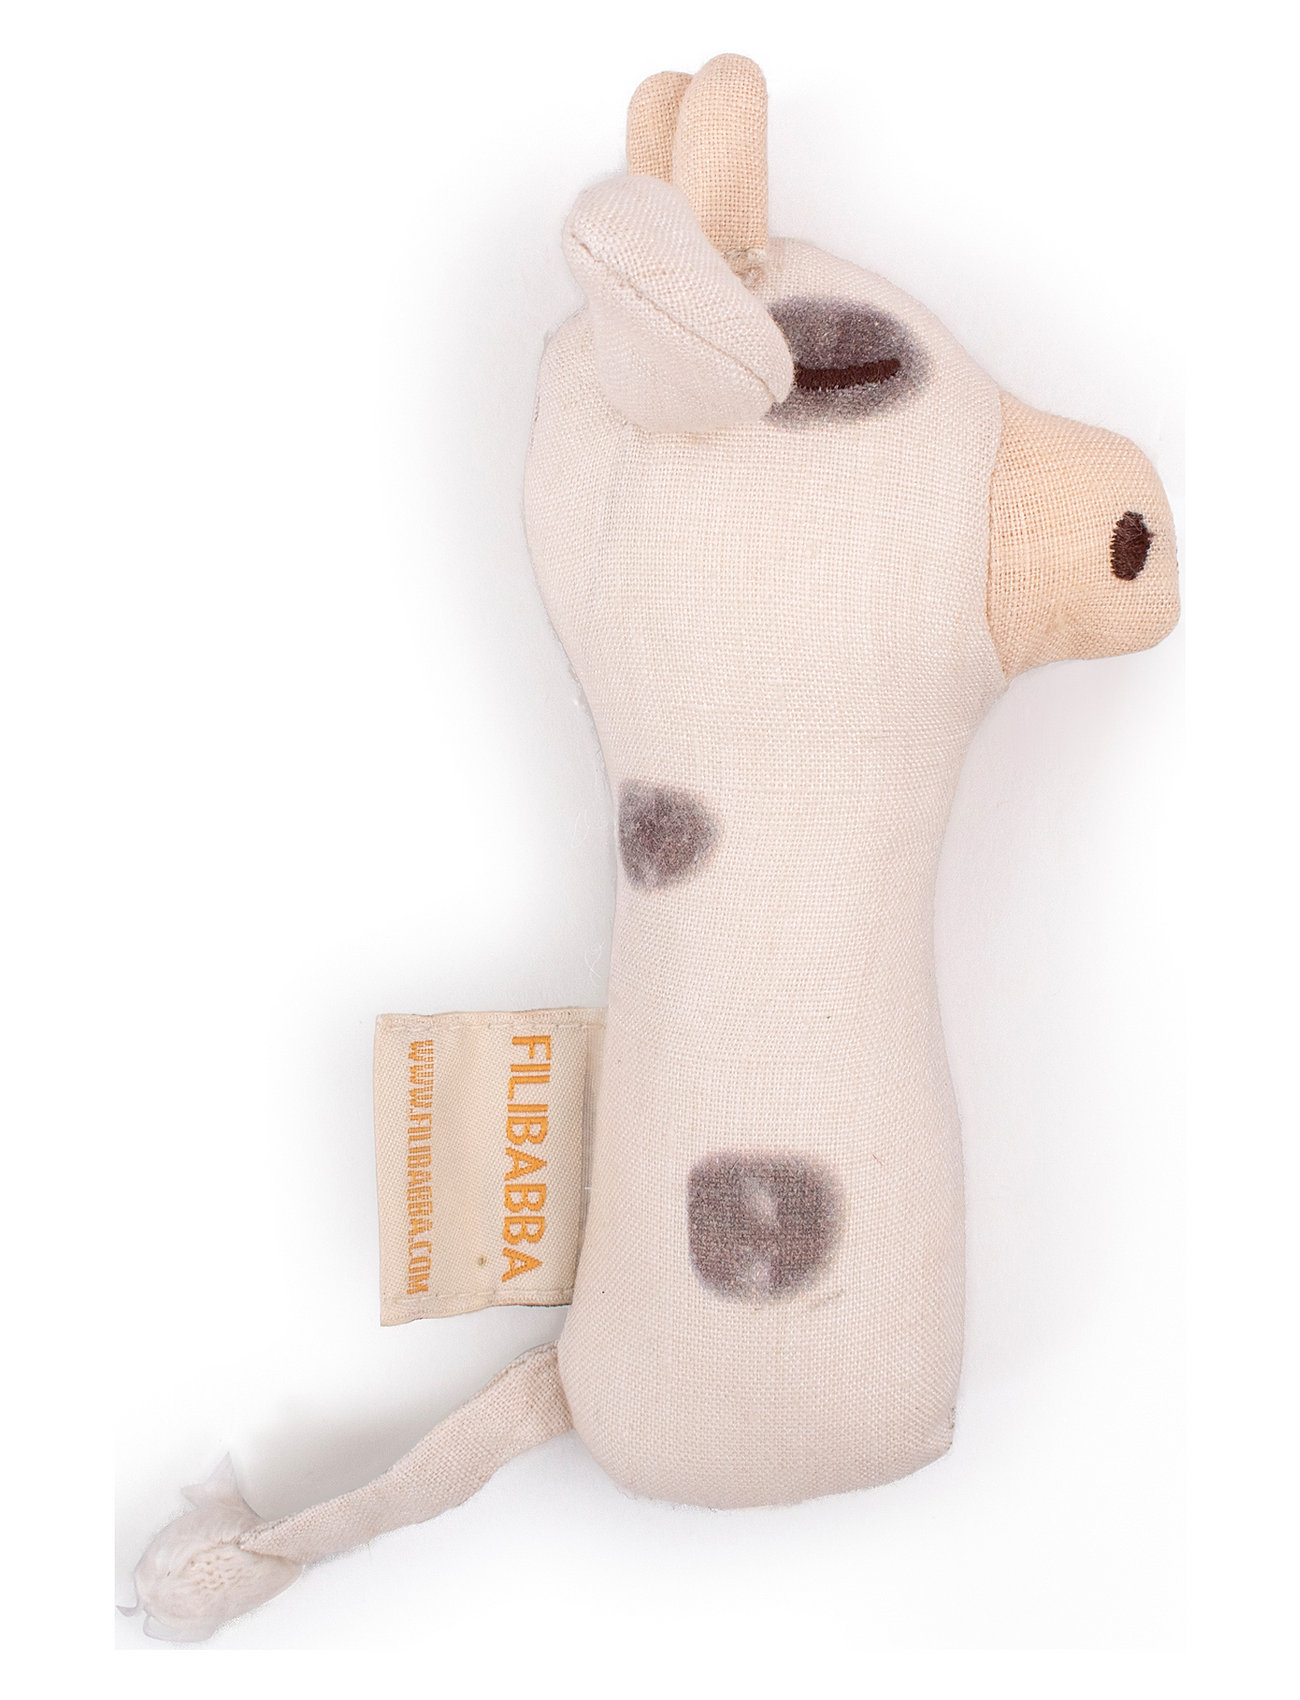 Linen Rattle - Cow Toys Baby Toys Rattles Multi/patterned Filibabba